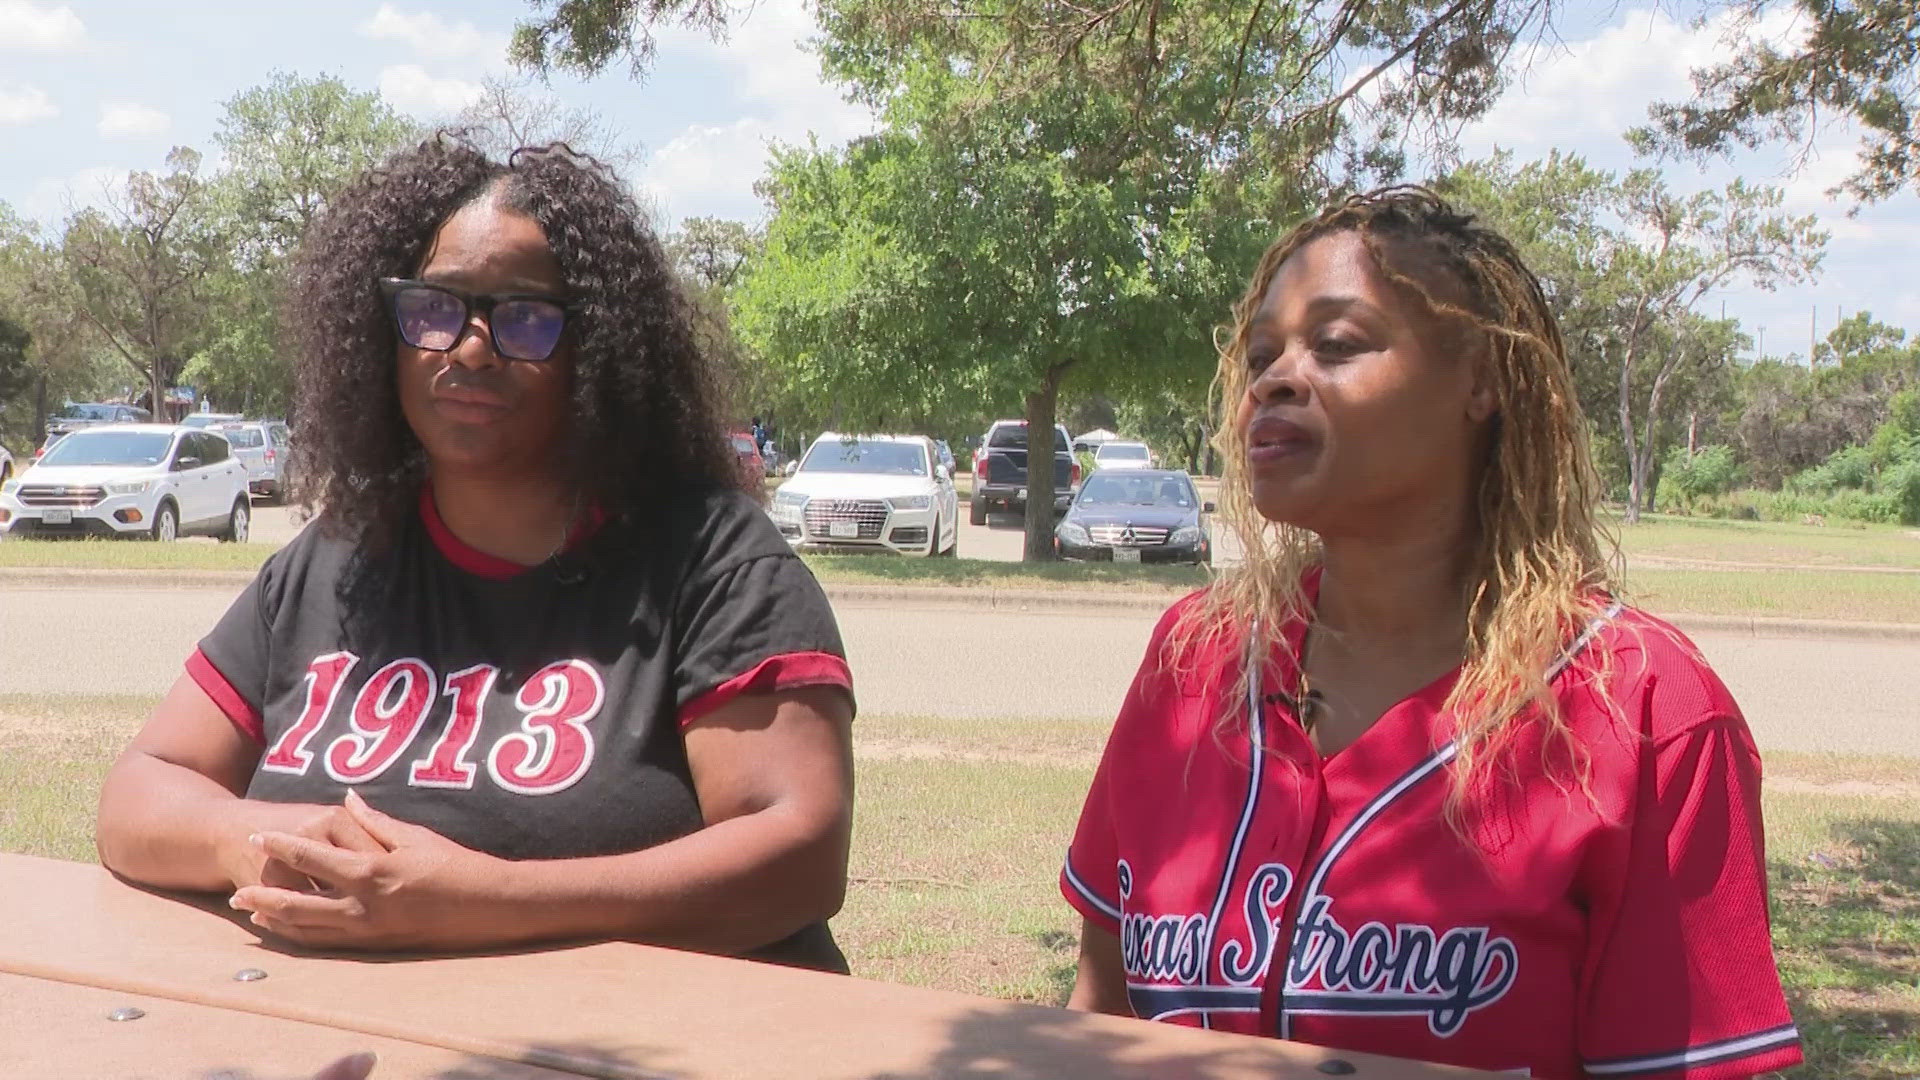 LaTisha Agent and Paige Overland spoke to KVUE about their experience at the Round Rock Juneteenth festival, where a shooting left at least two people dead.